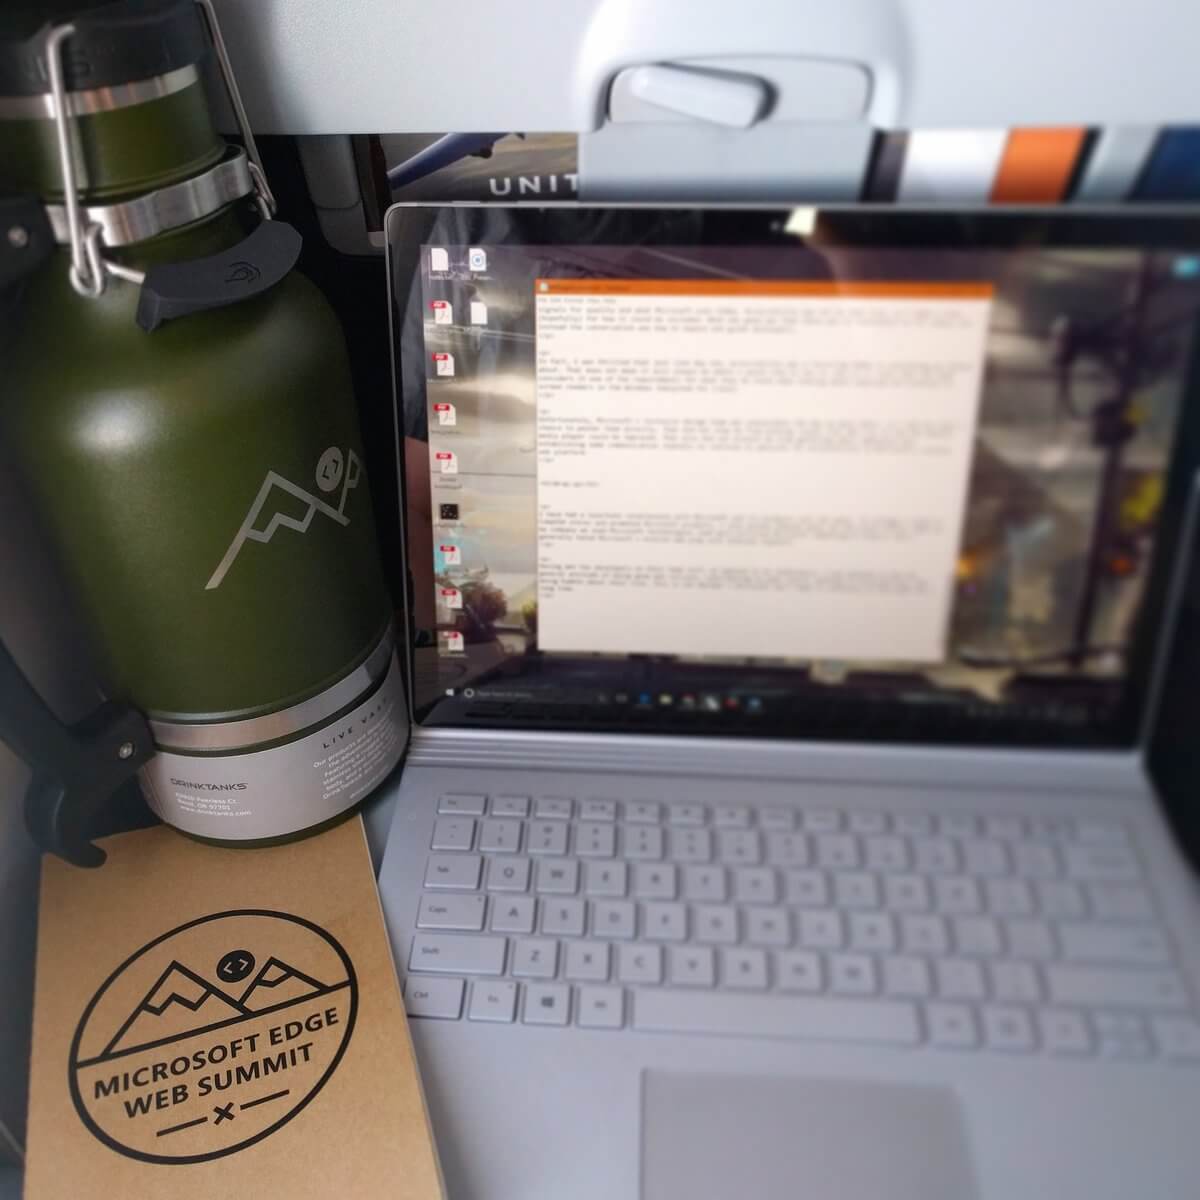 My laptop on the airplane tray table along with the free ‘Microsoft Edge Web Summit’ branded Moleskine. Crowding them both off the tray a bit and jammed up against the bulkhead is the giant insulated 64oz drink container, also emblazoned with ‘Microsoft Edge Web Summit’.